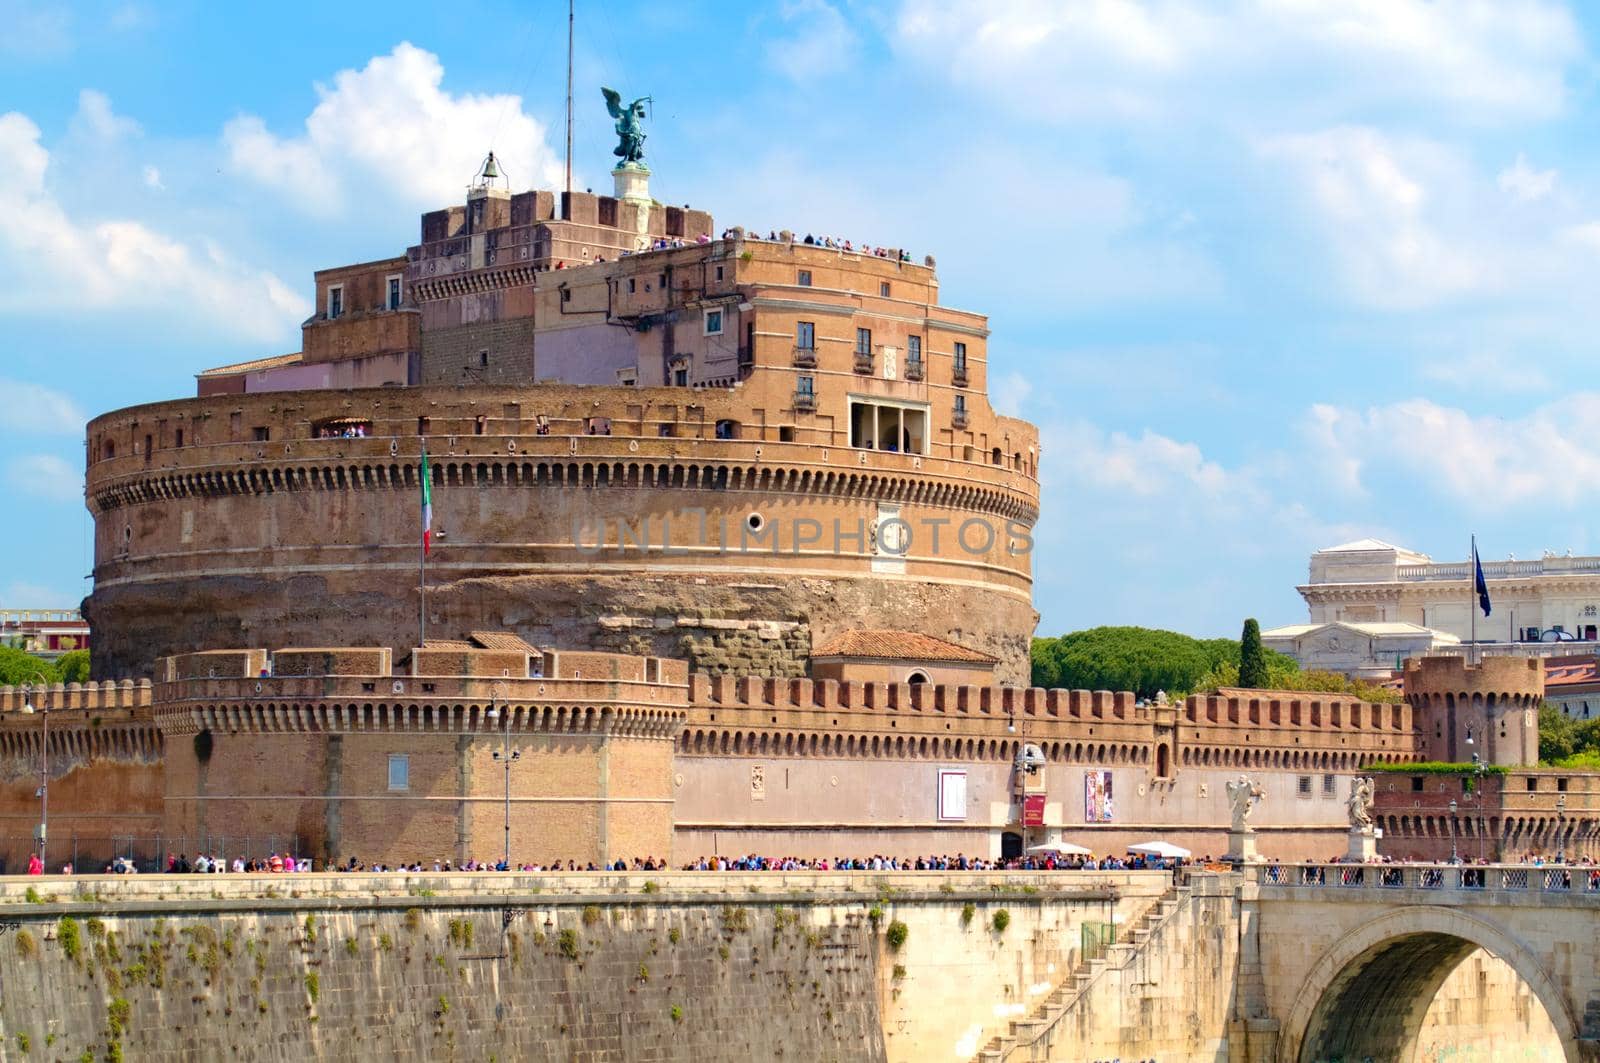 The Mausoleum of Hadrian, also known as the Castel Sant'Angelo, in Rome, Italy. It was built by Roman Emperor Hadrian in the year 139.